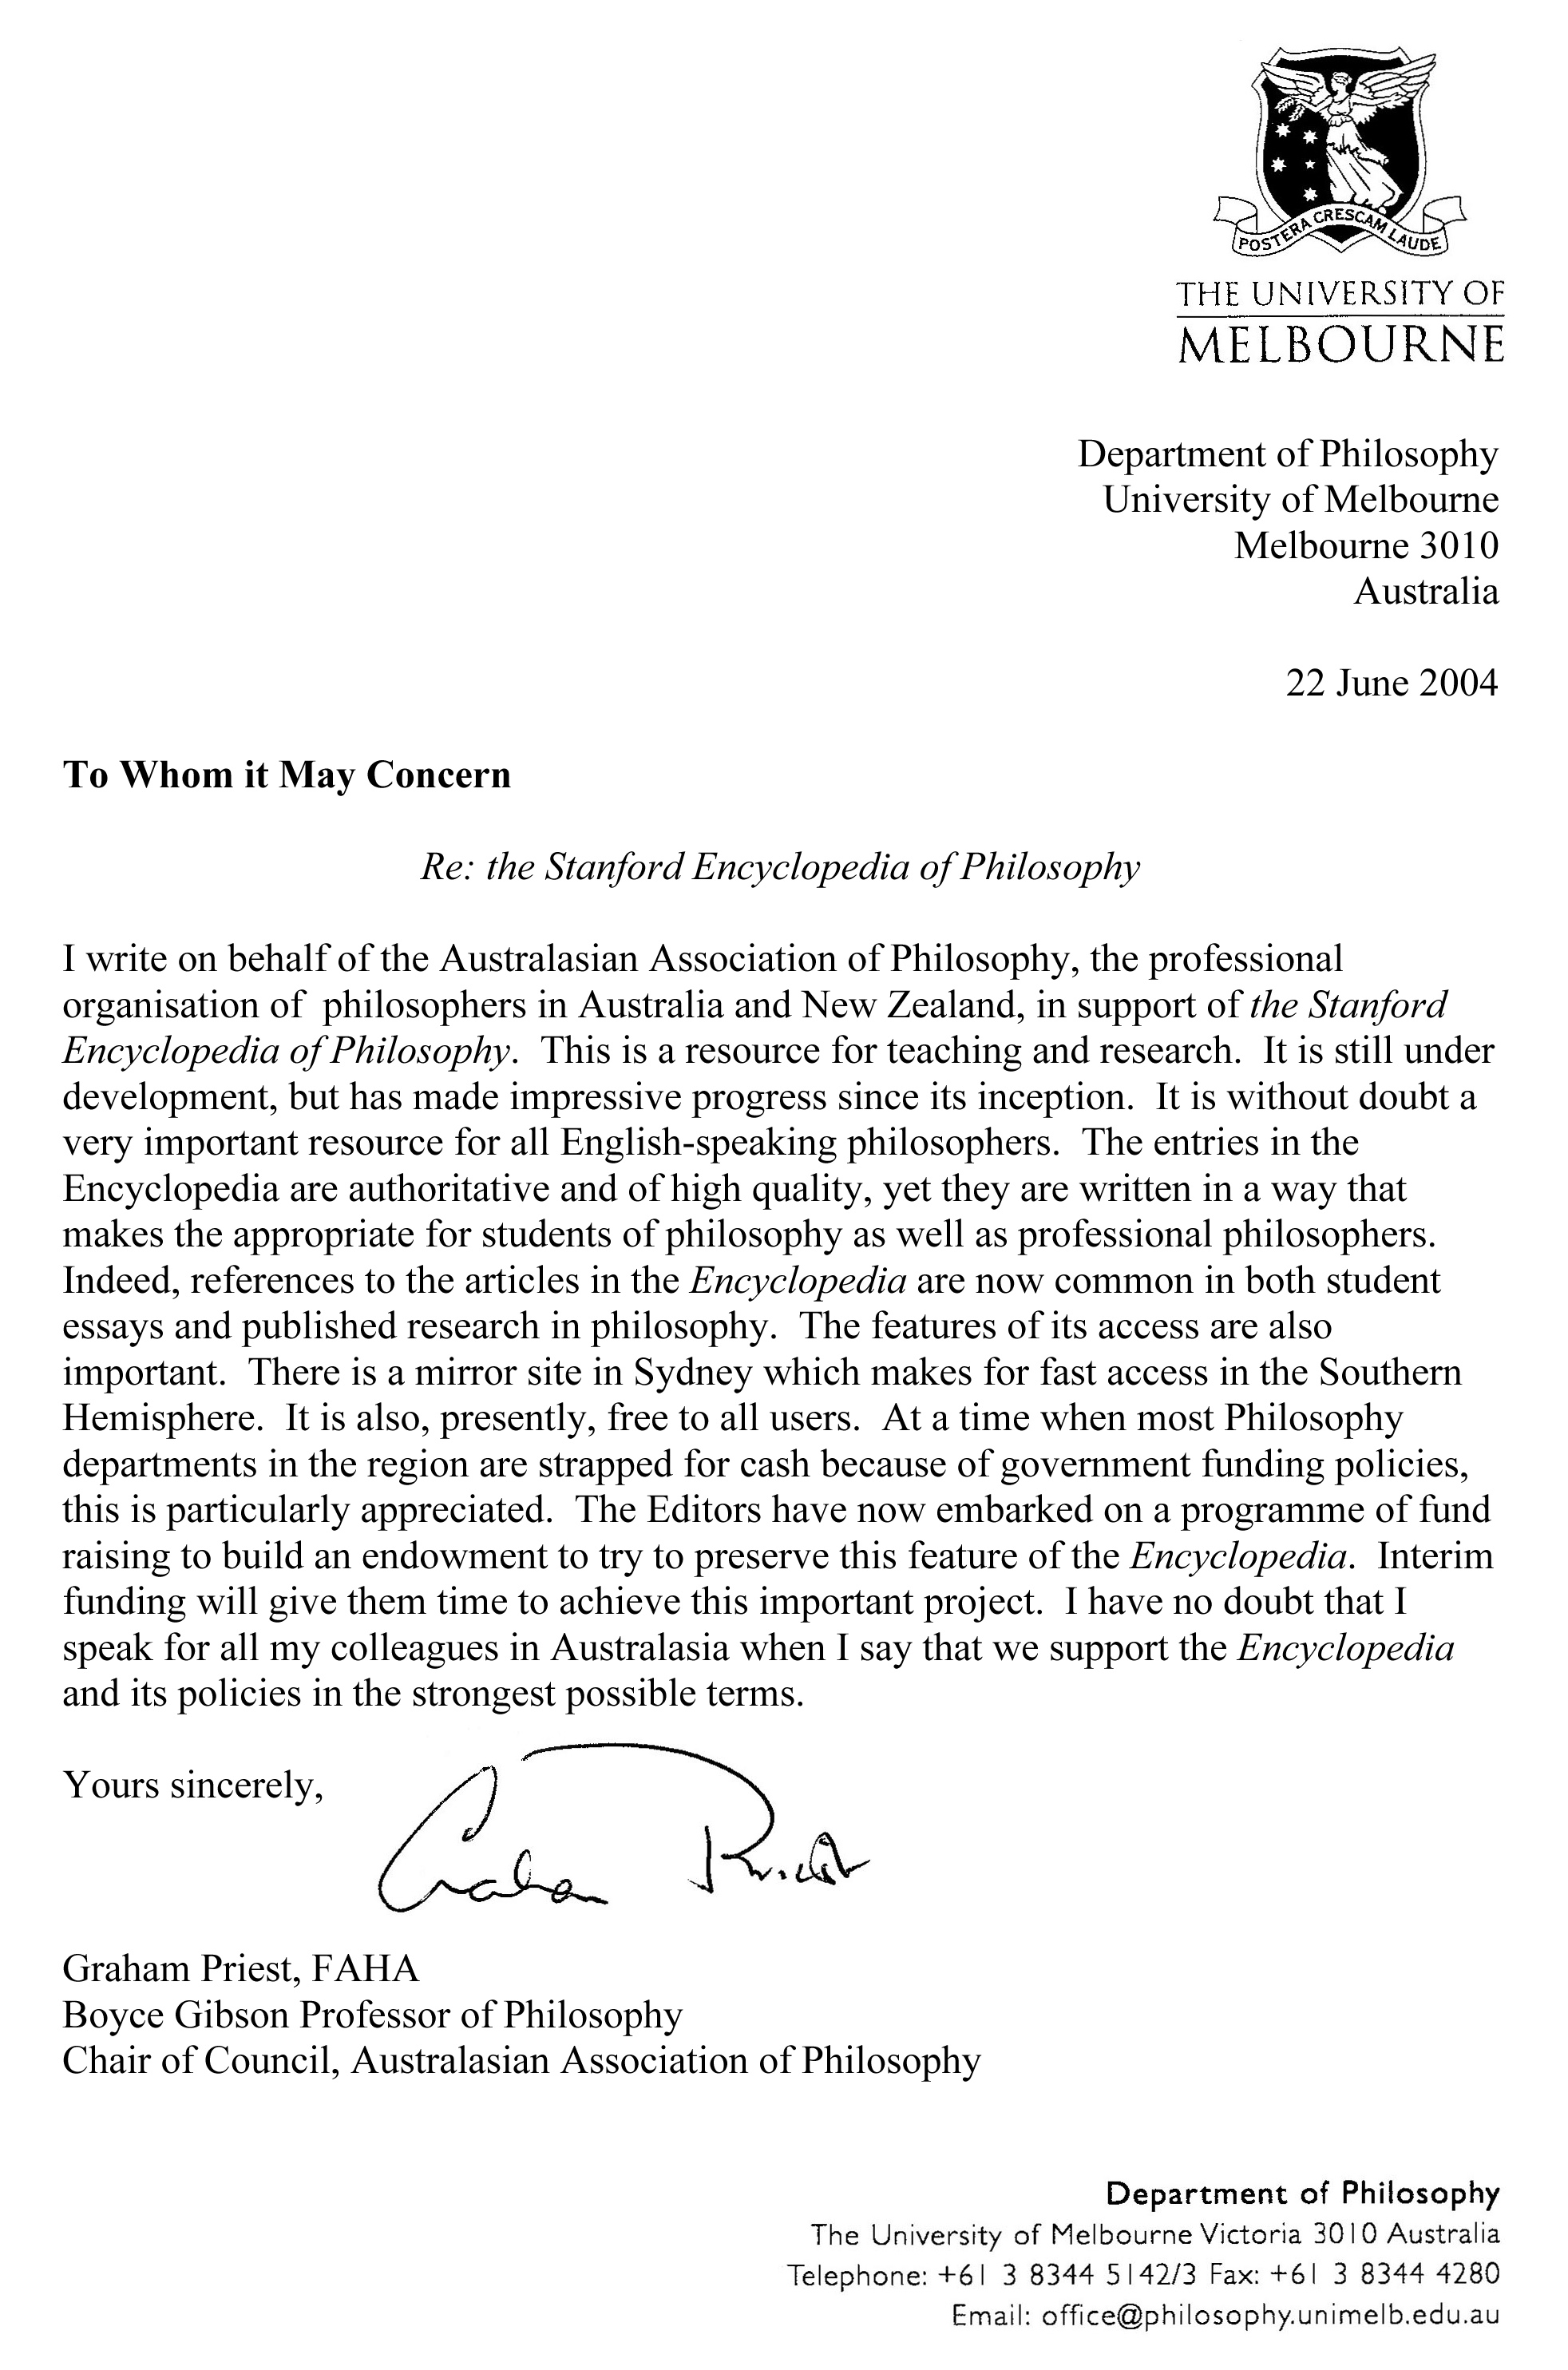 AAP's Letter in Support of NEH Grant